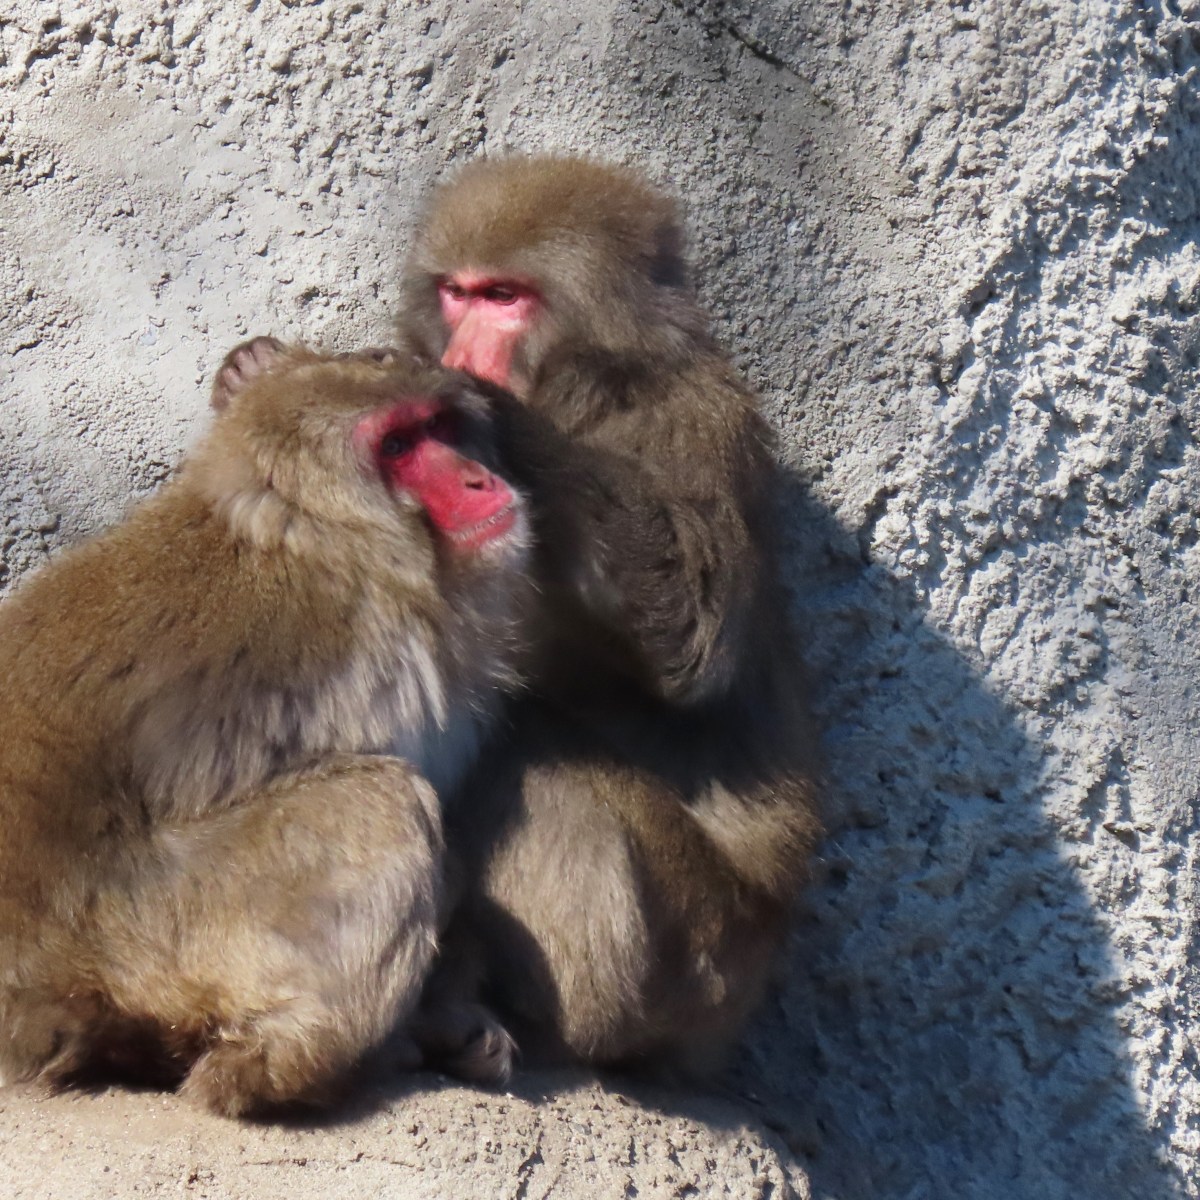 A Japanese macaque monkey grooms another on a ledge